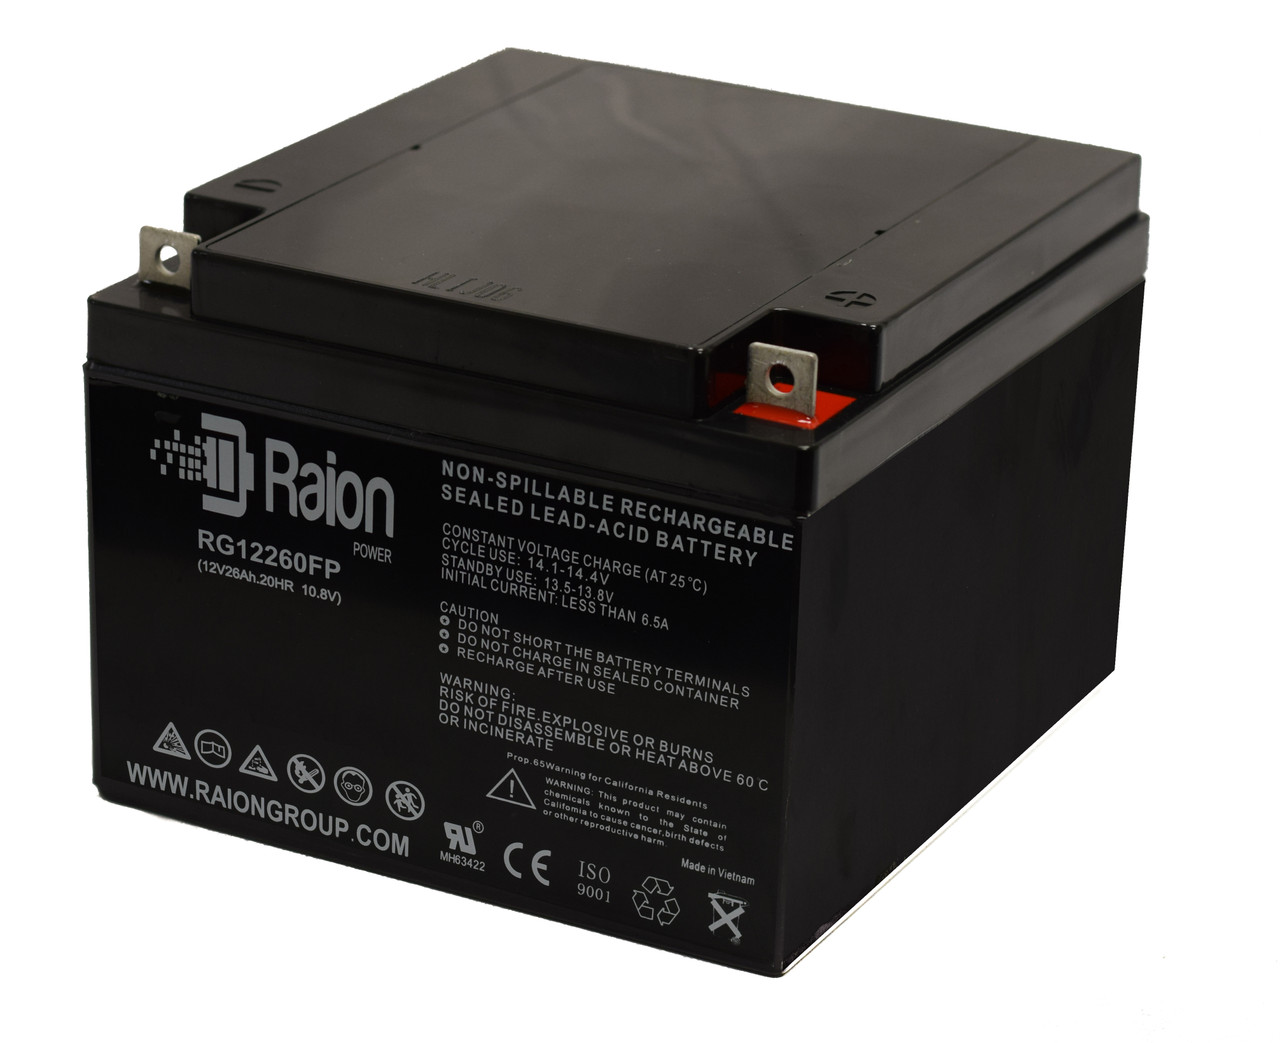 Raion Power Replacement 12V 26Ah Battery for BB HR33-12 - 1 Pack